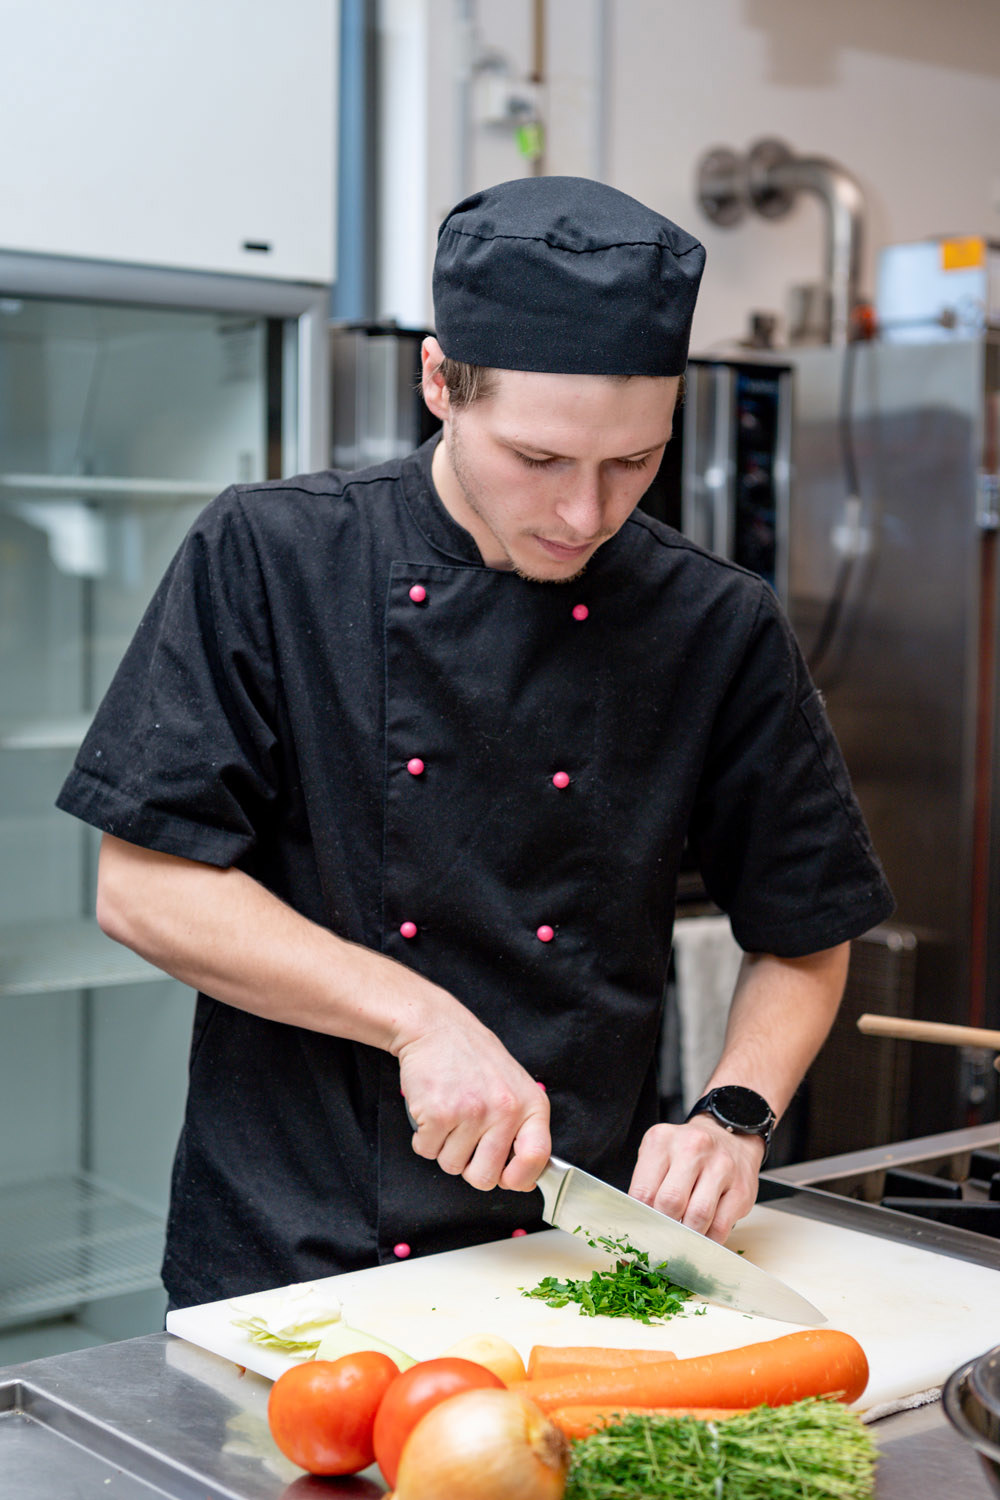 Jesse Alexander completed an apprenticeship in commercial cookery at South West TAFE.